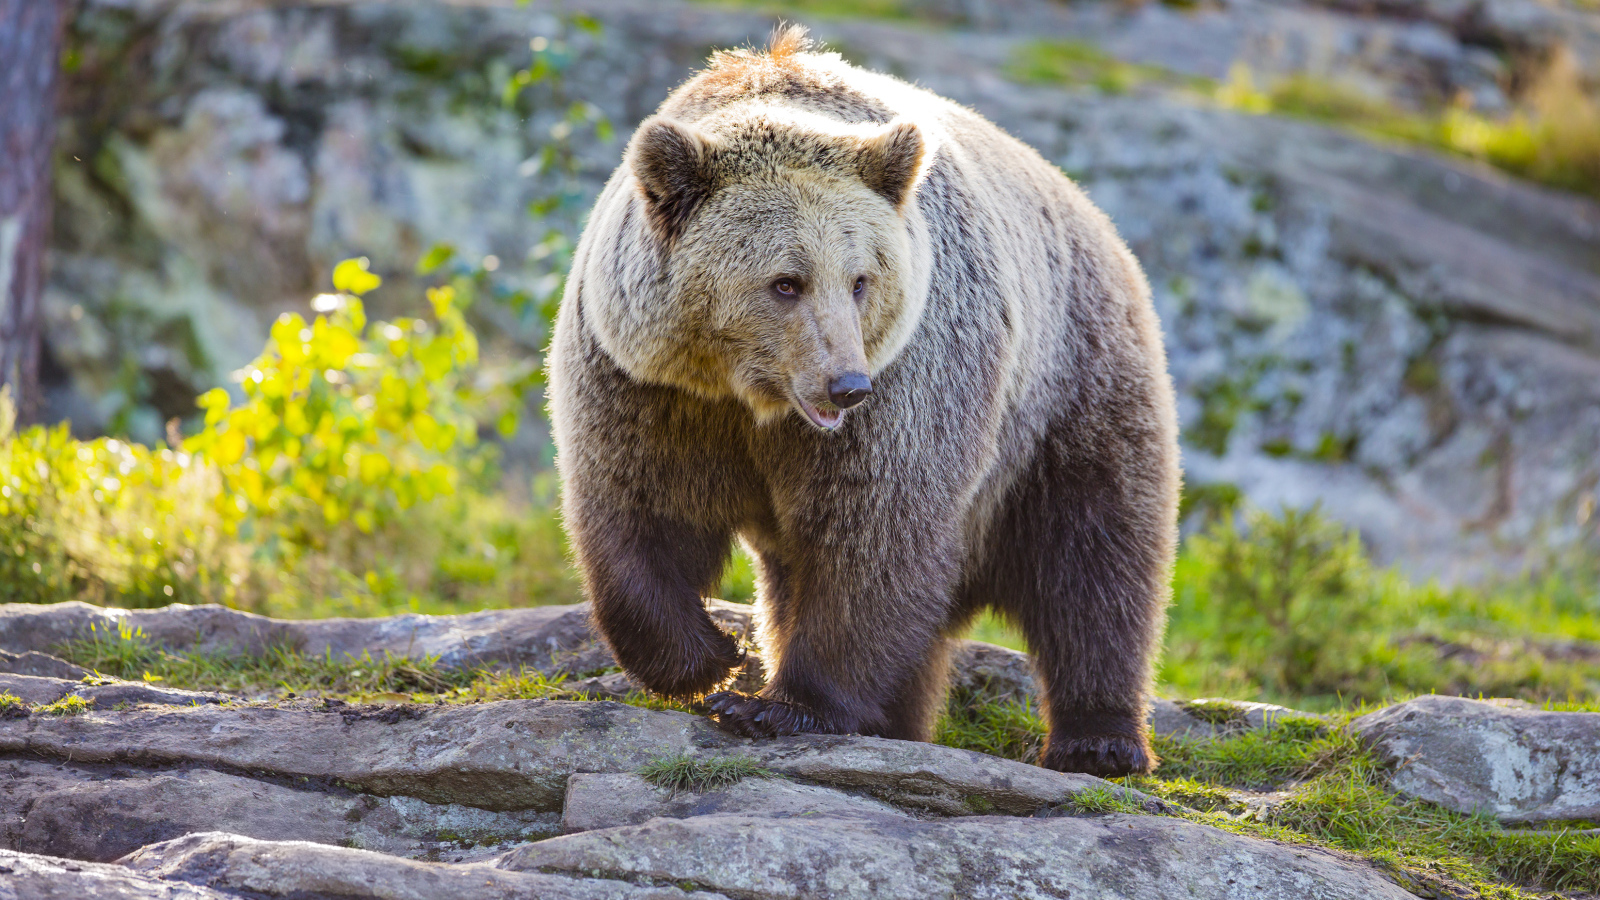 A large grizzly bear walks the rocks